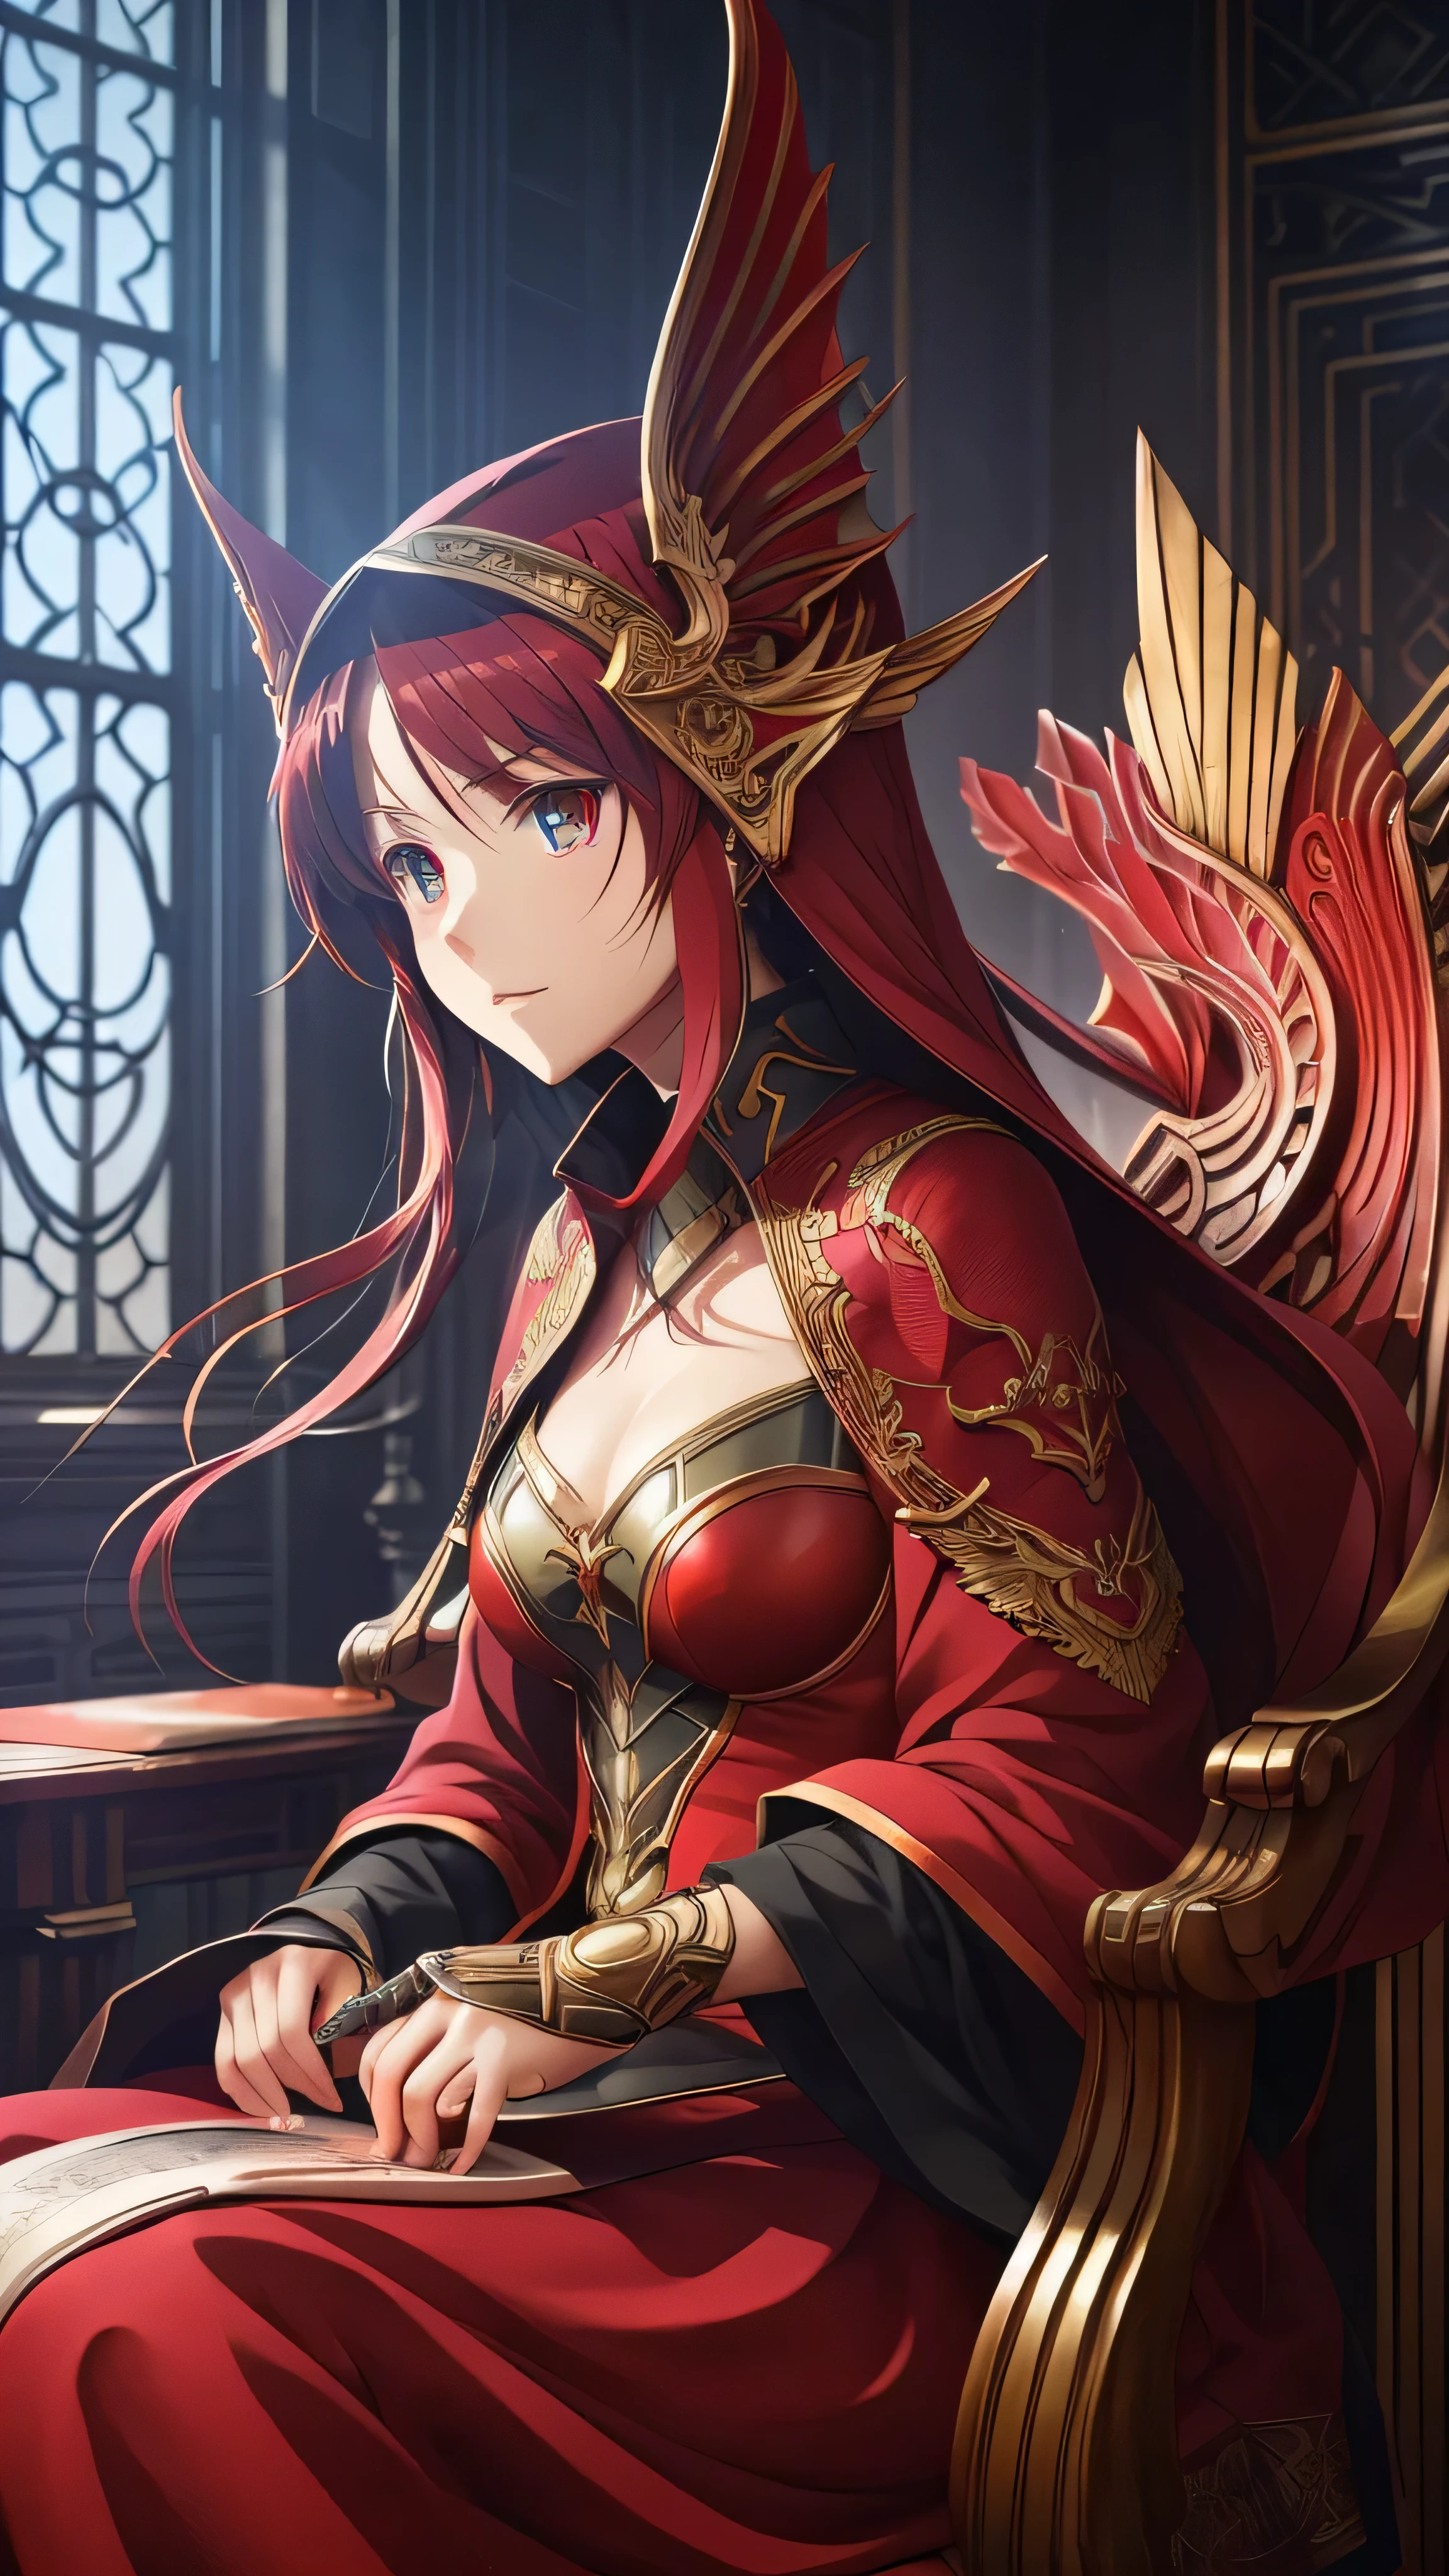 Wrapped in a captivating crimson coat、Hall々Sitting elegantly in a comfortable chair、Breathtaking CG artwork featuring majestic dragons。The artwork is in the popular anime style featured on ArtStation and Pixiv.、It showcases the intricate and gorgeous anime CGI style of the talented Guvez.。The meticulously crafted digital anime art、The book is woven with detailed and fascinating illustrations that exude a sense of fantasy.。The artwork is、Boasting clean, detailed anime art、Highlight key features with incredible precision